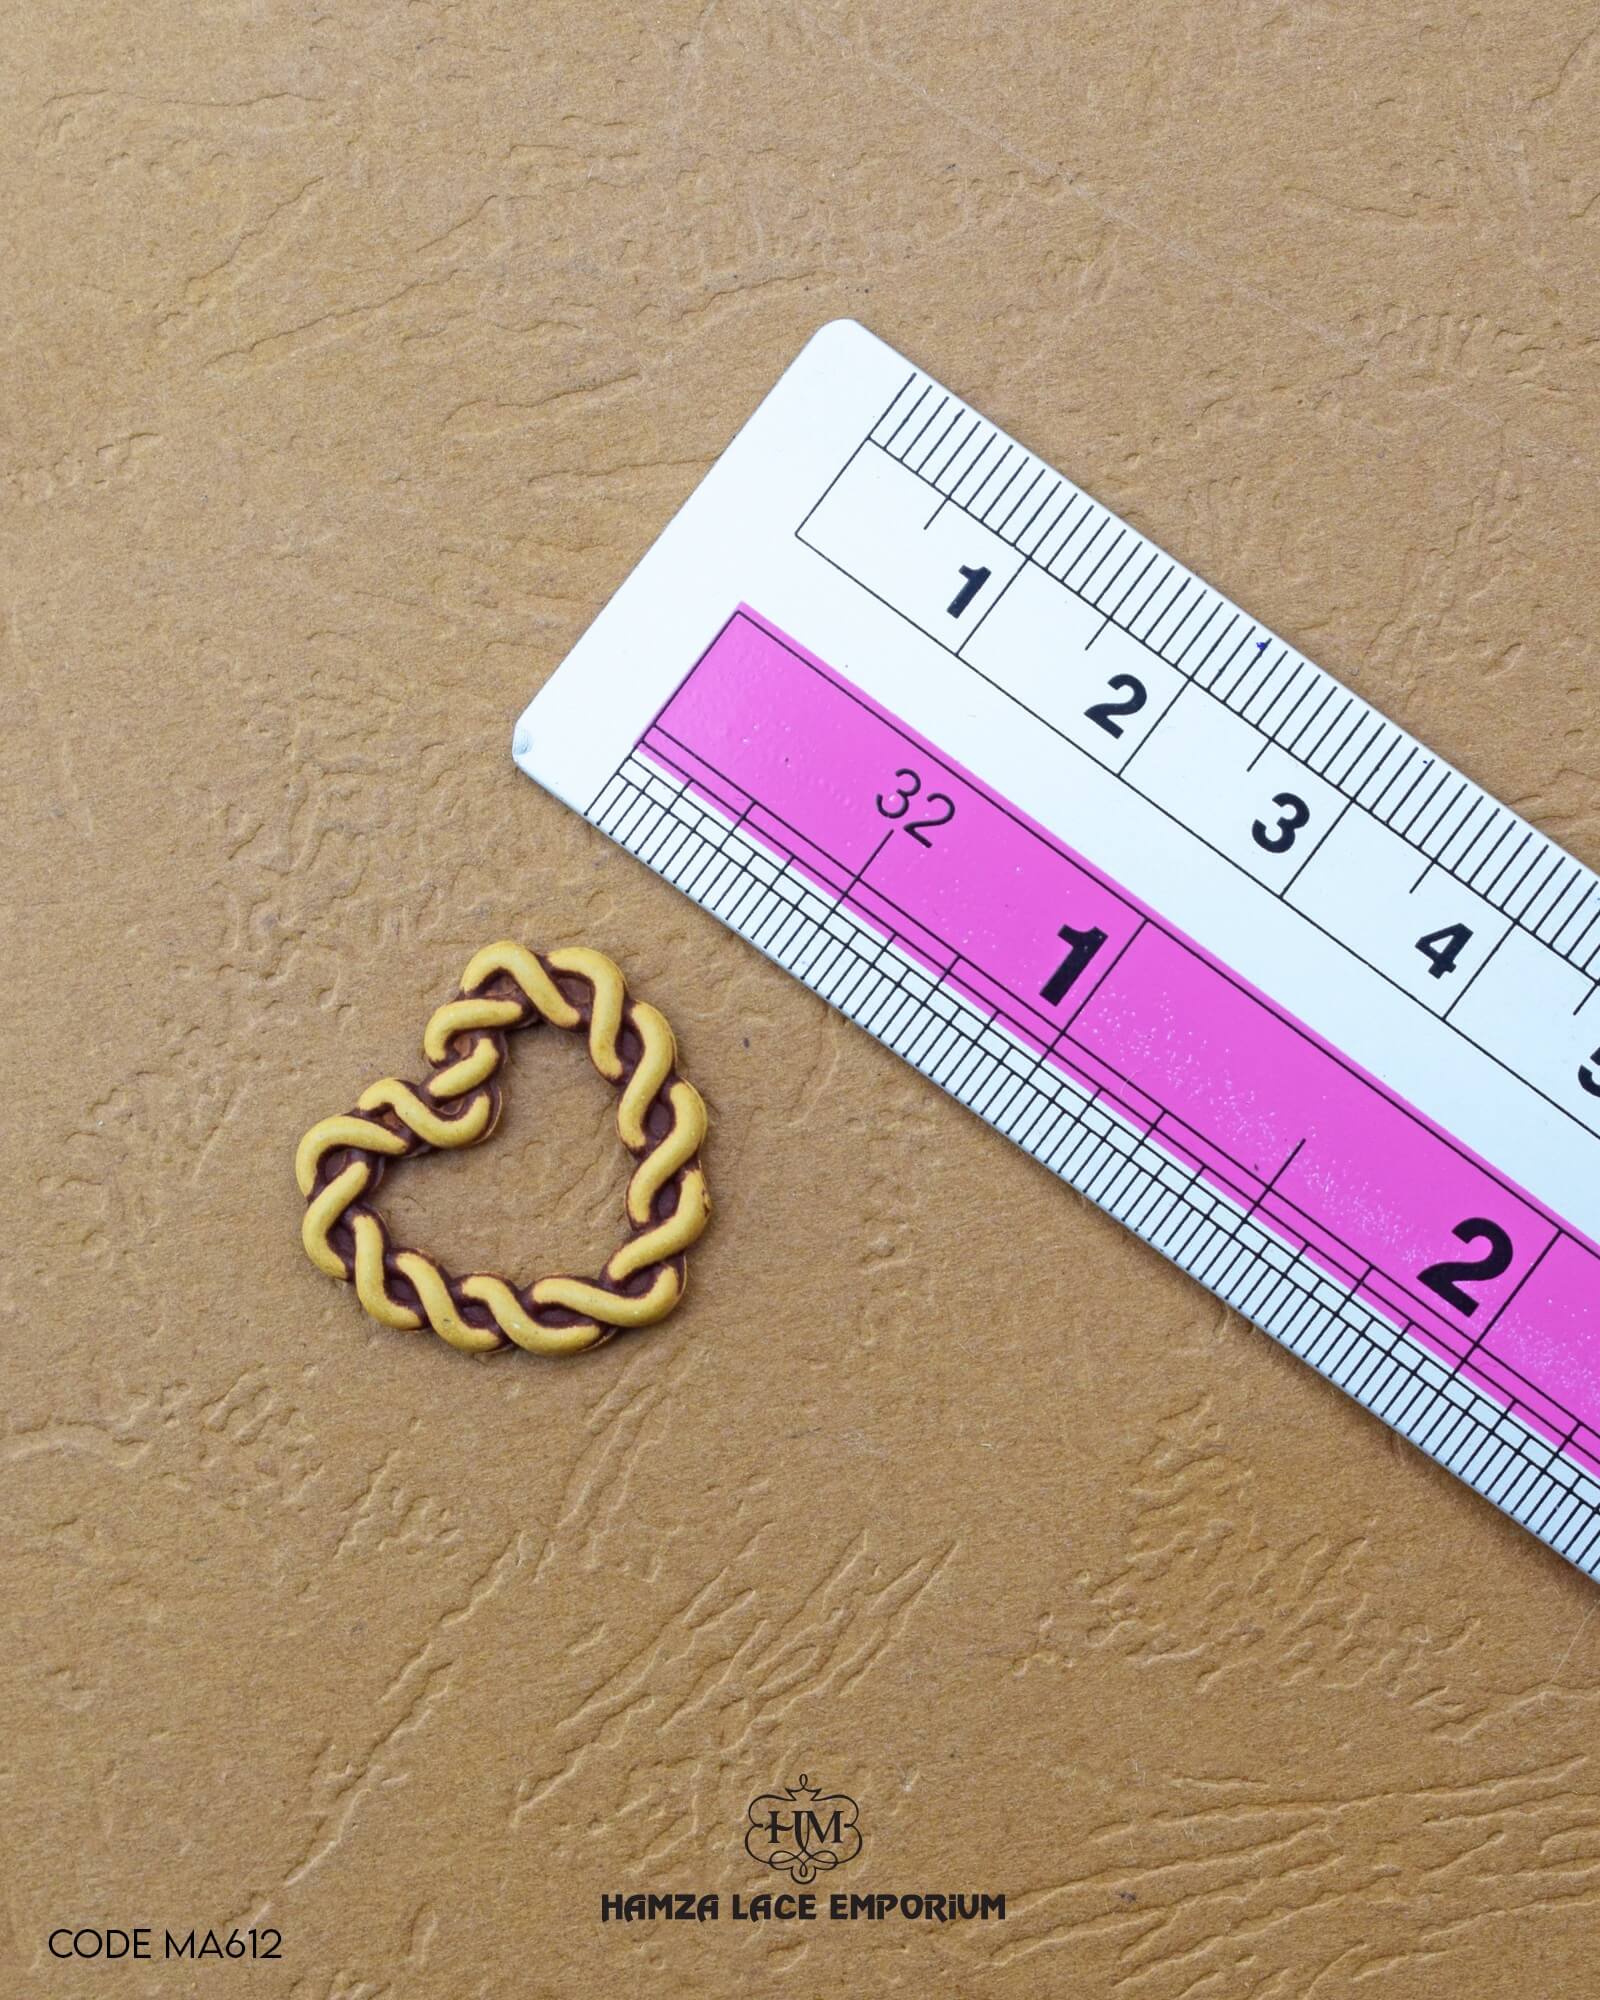 Size of the 'Heart Shape Wooden Button MA612' is shown with a ruler